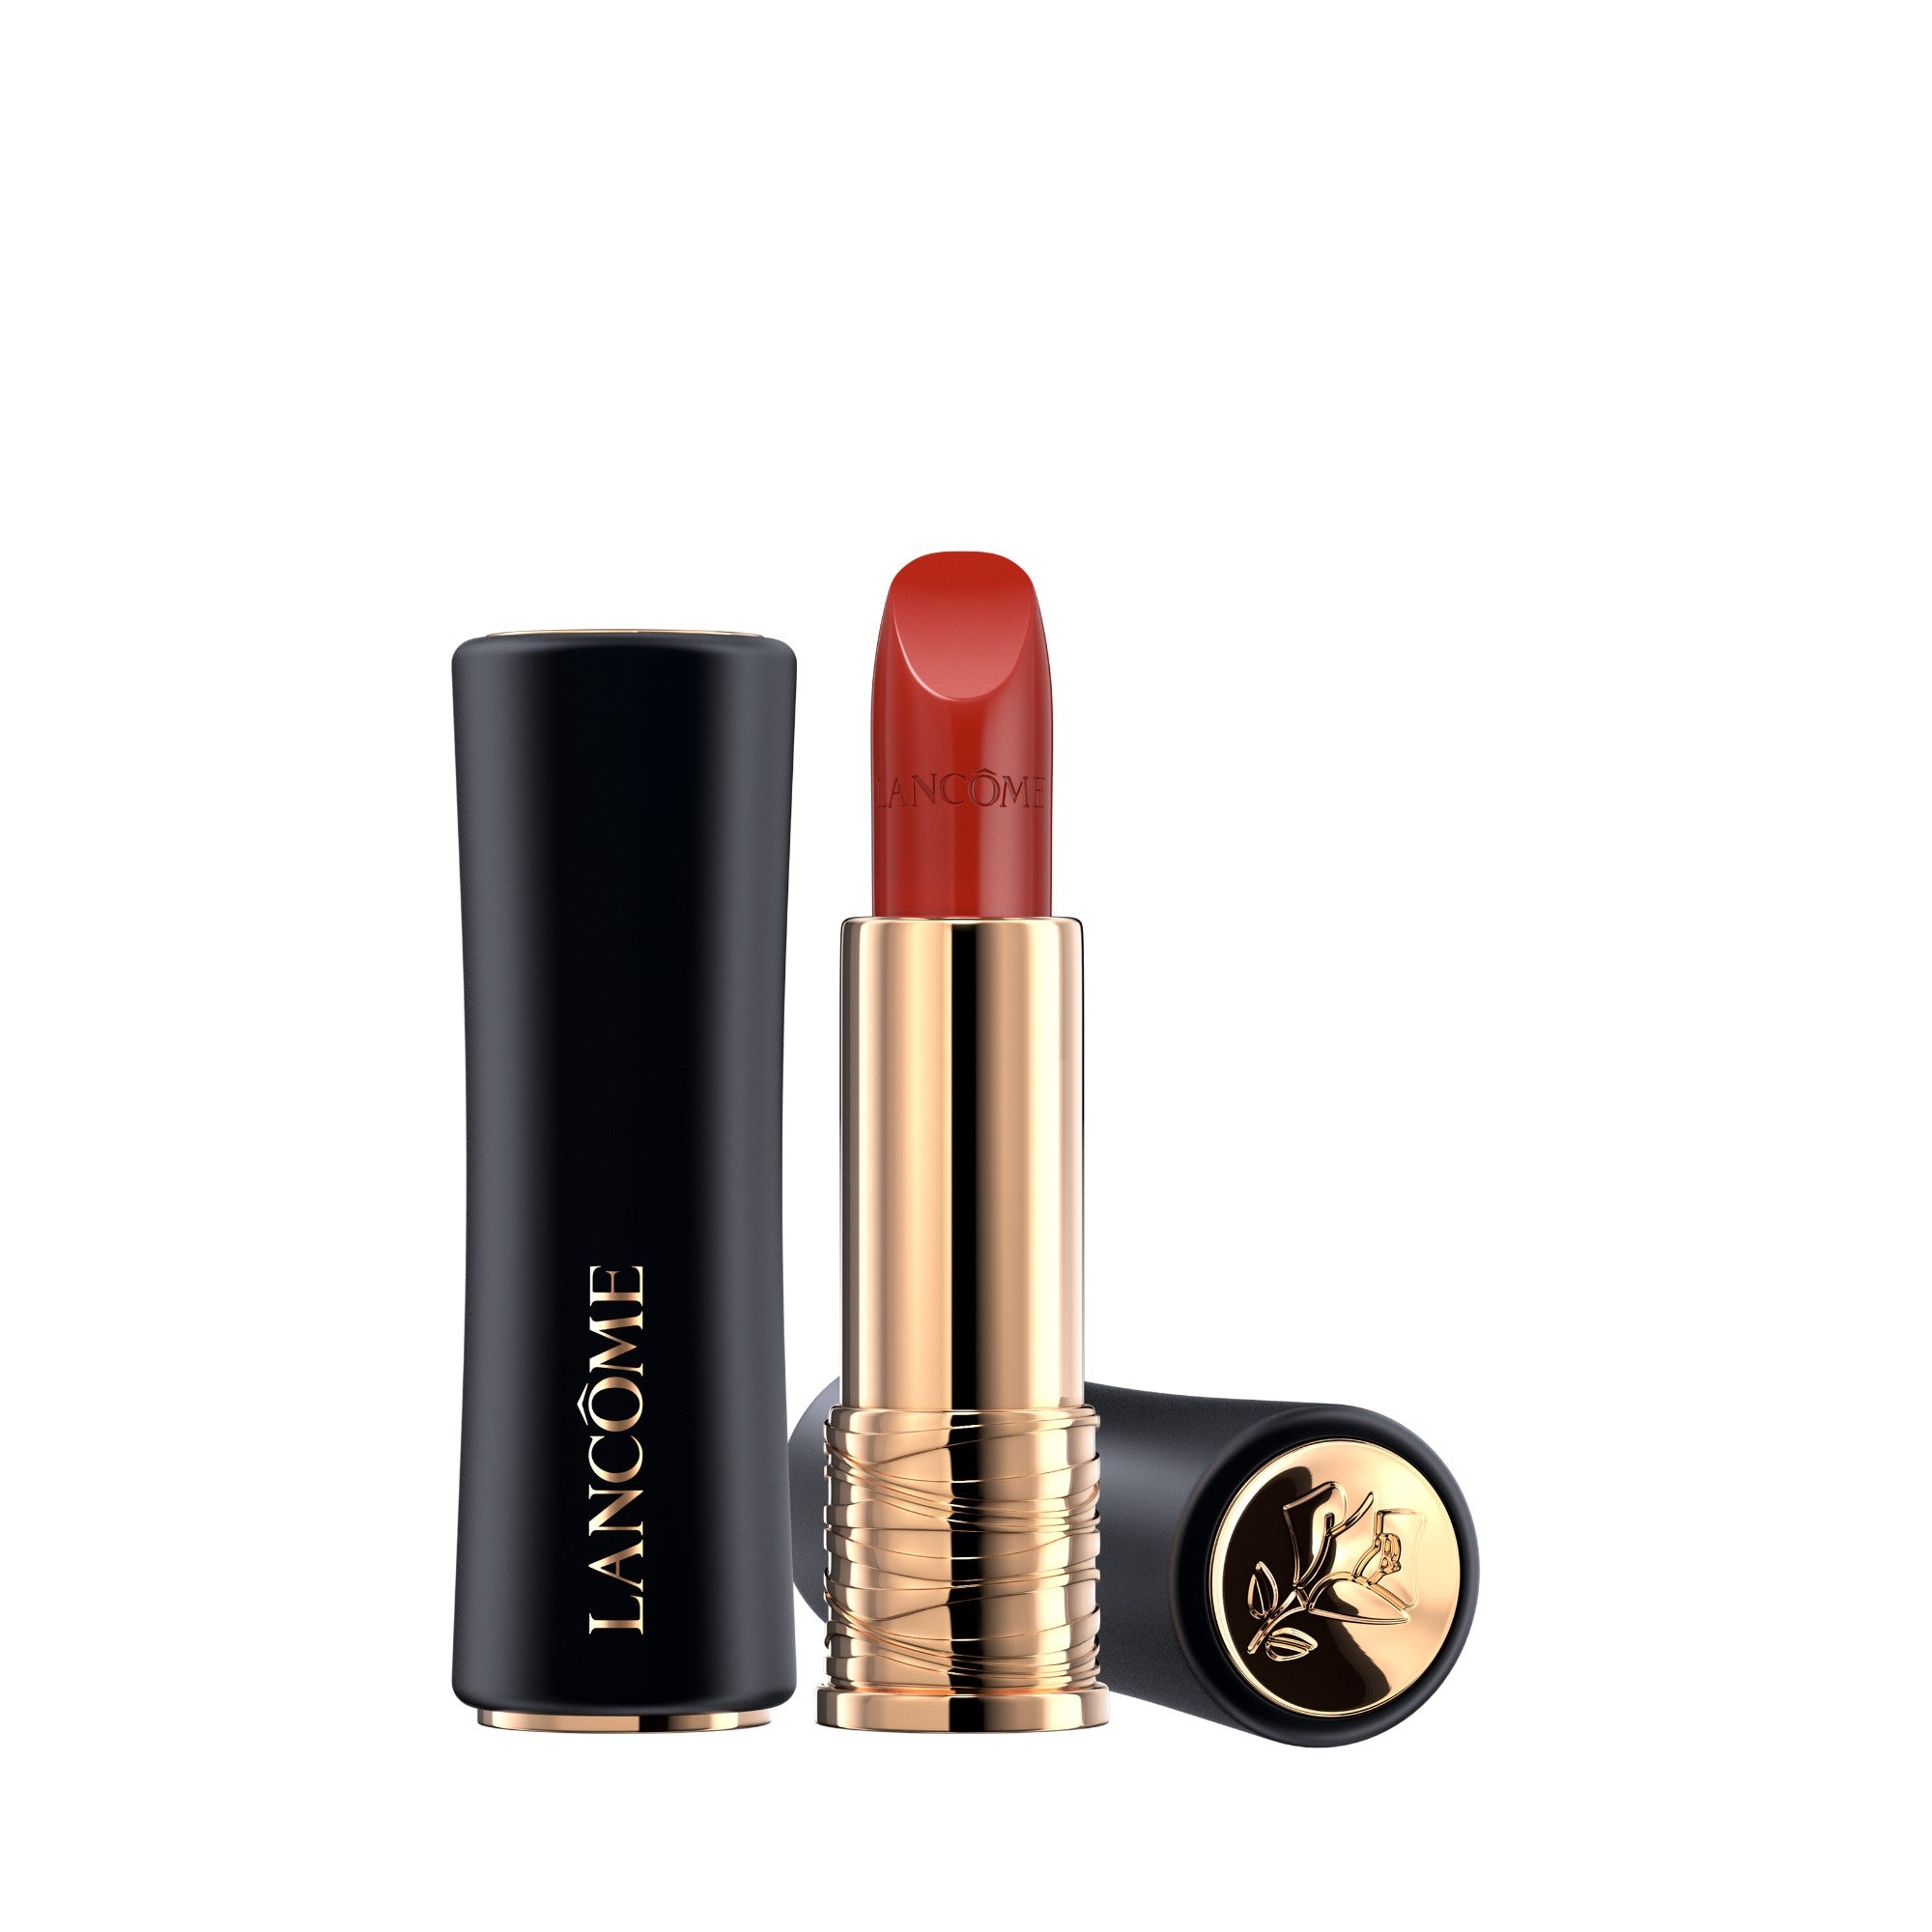 Lancome Absolu Rouge Cream Lipstick French Coeur Open